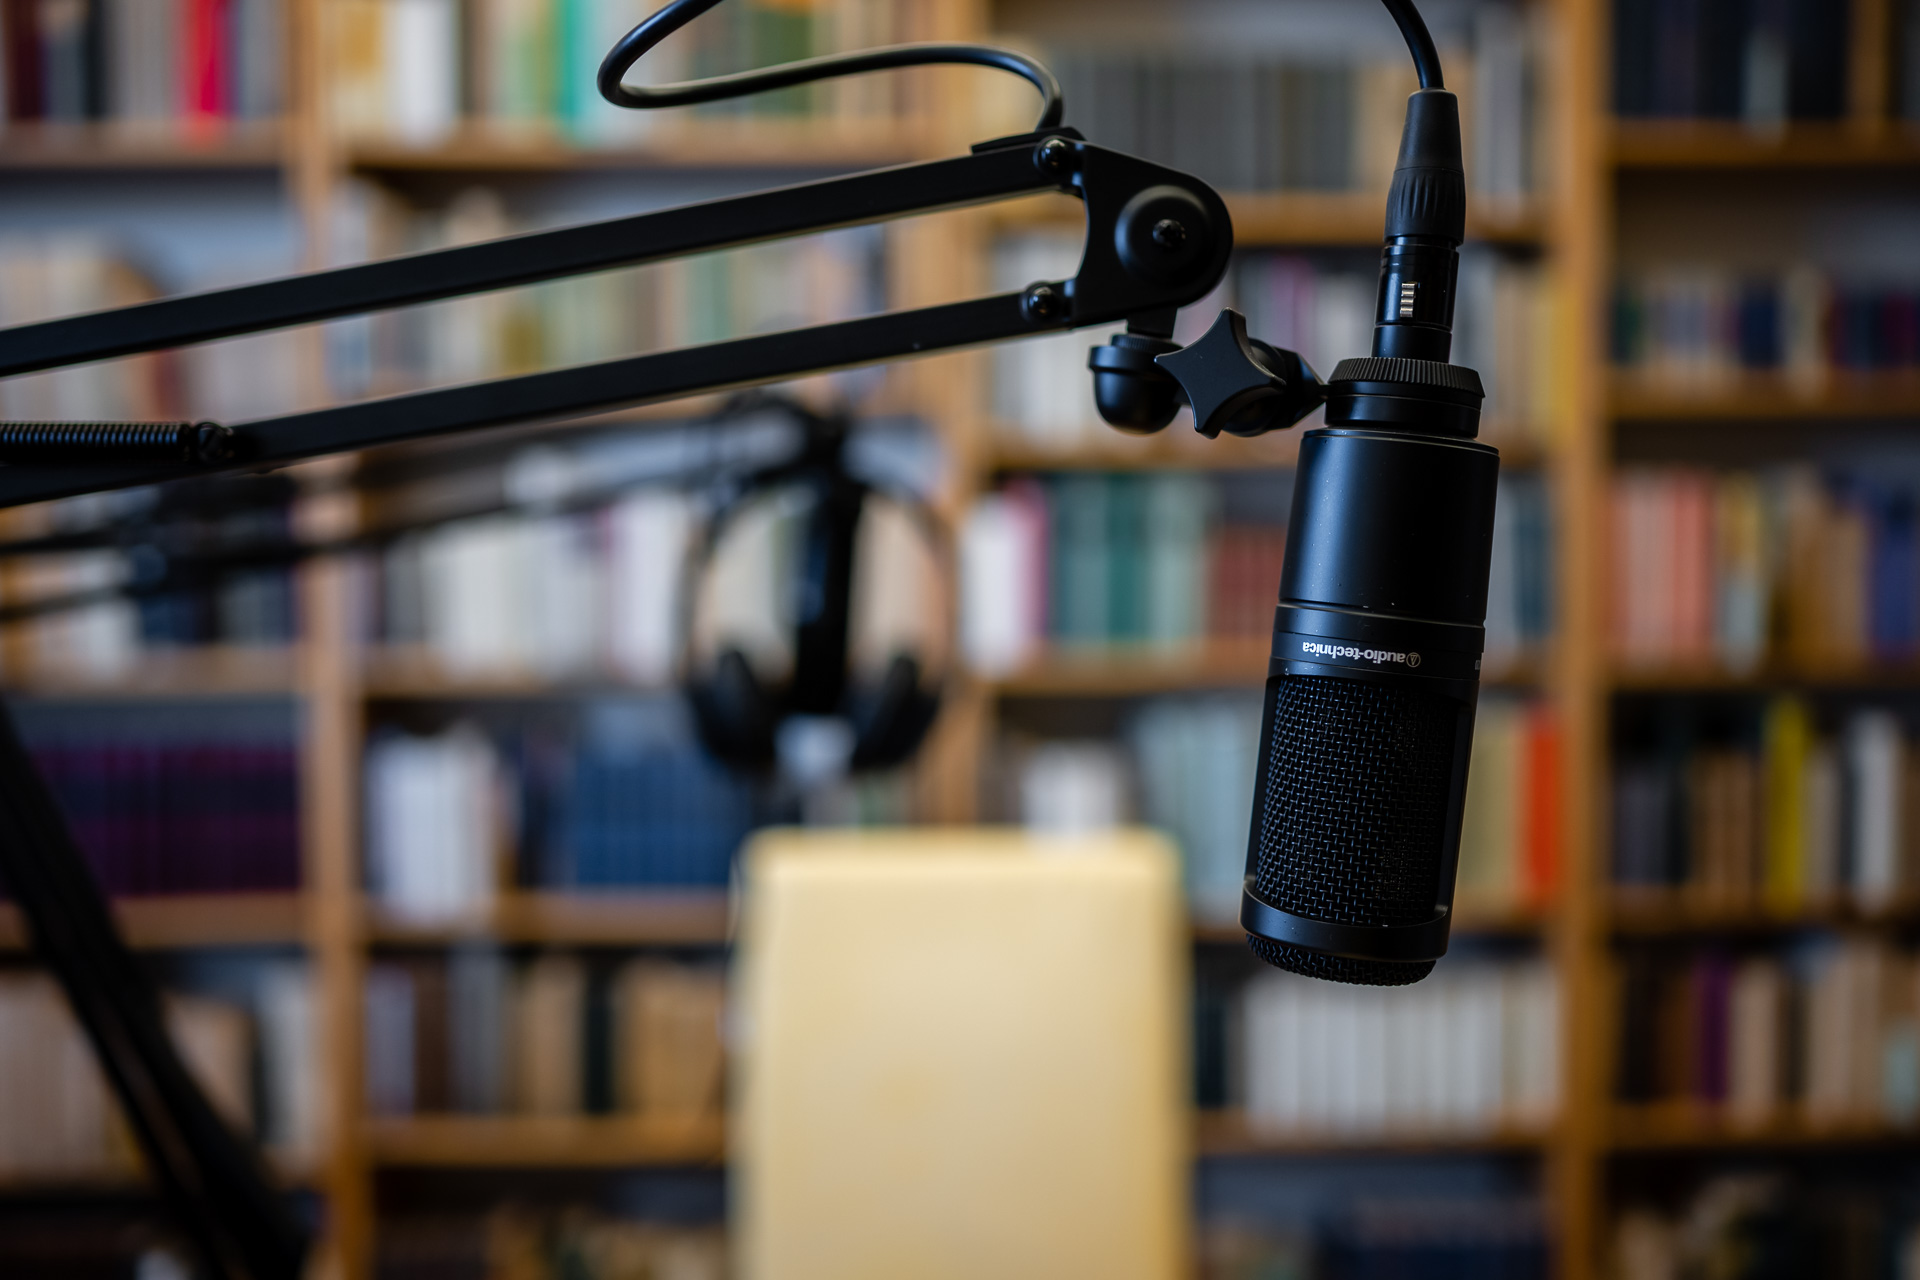 Podcast recording equipment at the IWM in front of a wall of books. A microphone in the foreground and blurry headphones in the background.